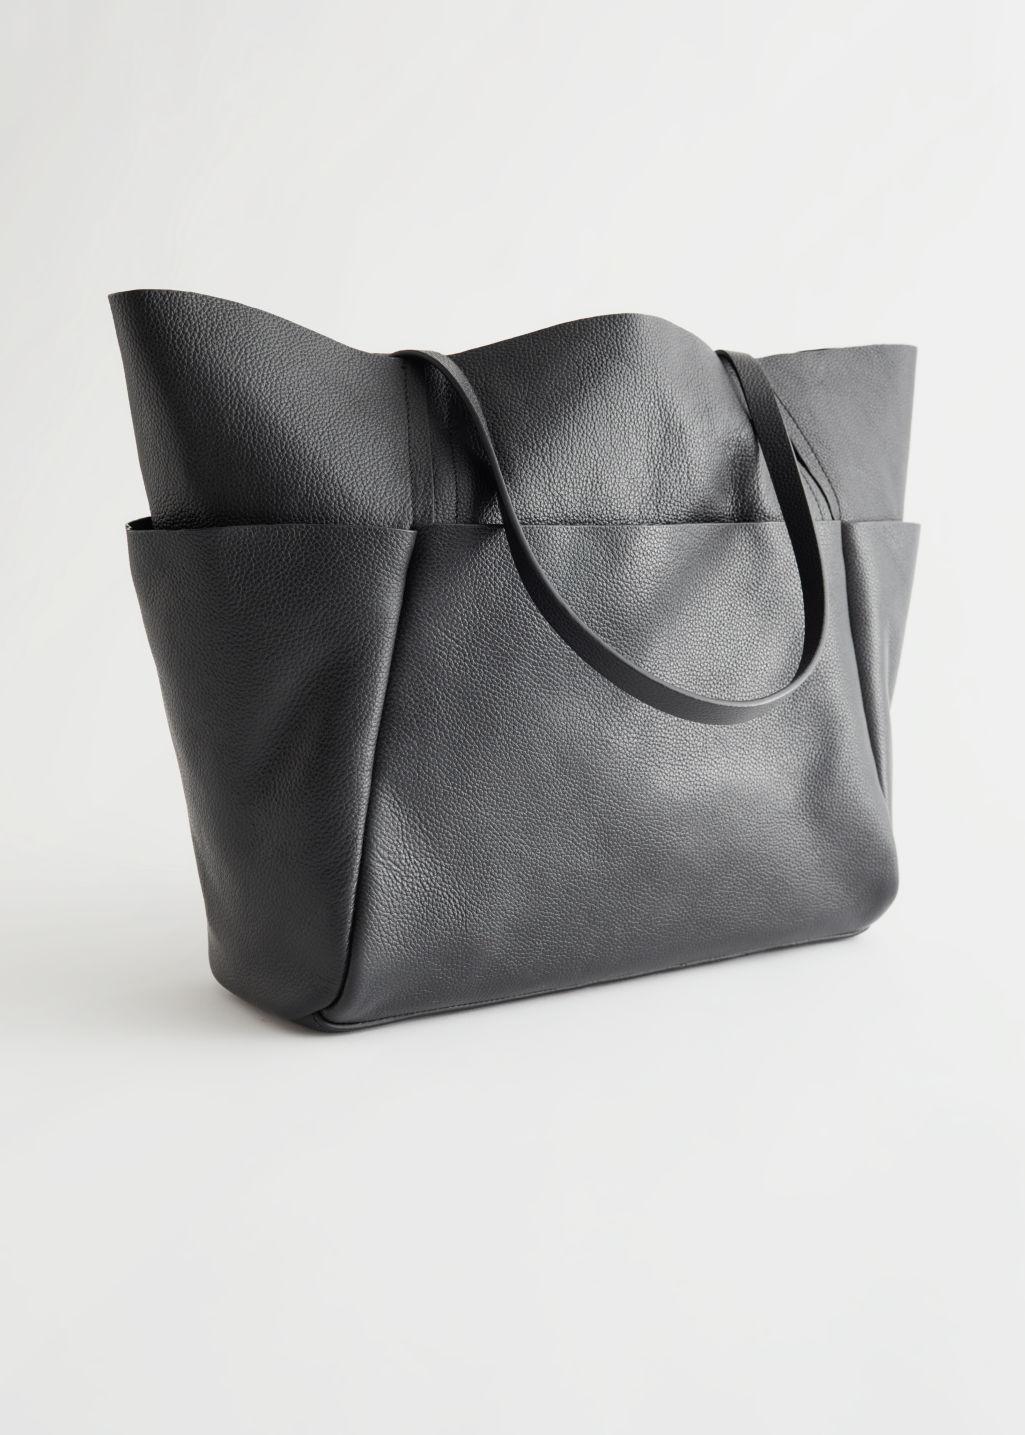  Other Stories patent leather tote bag in black